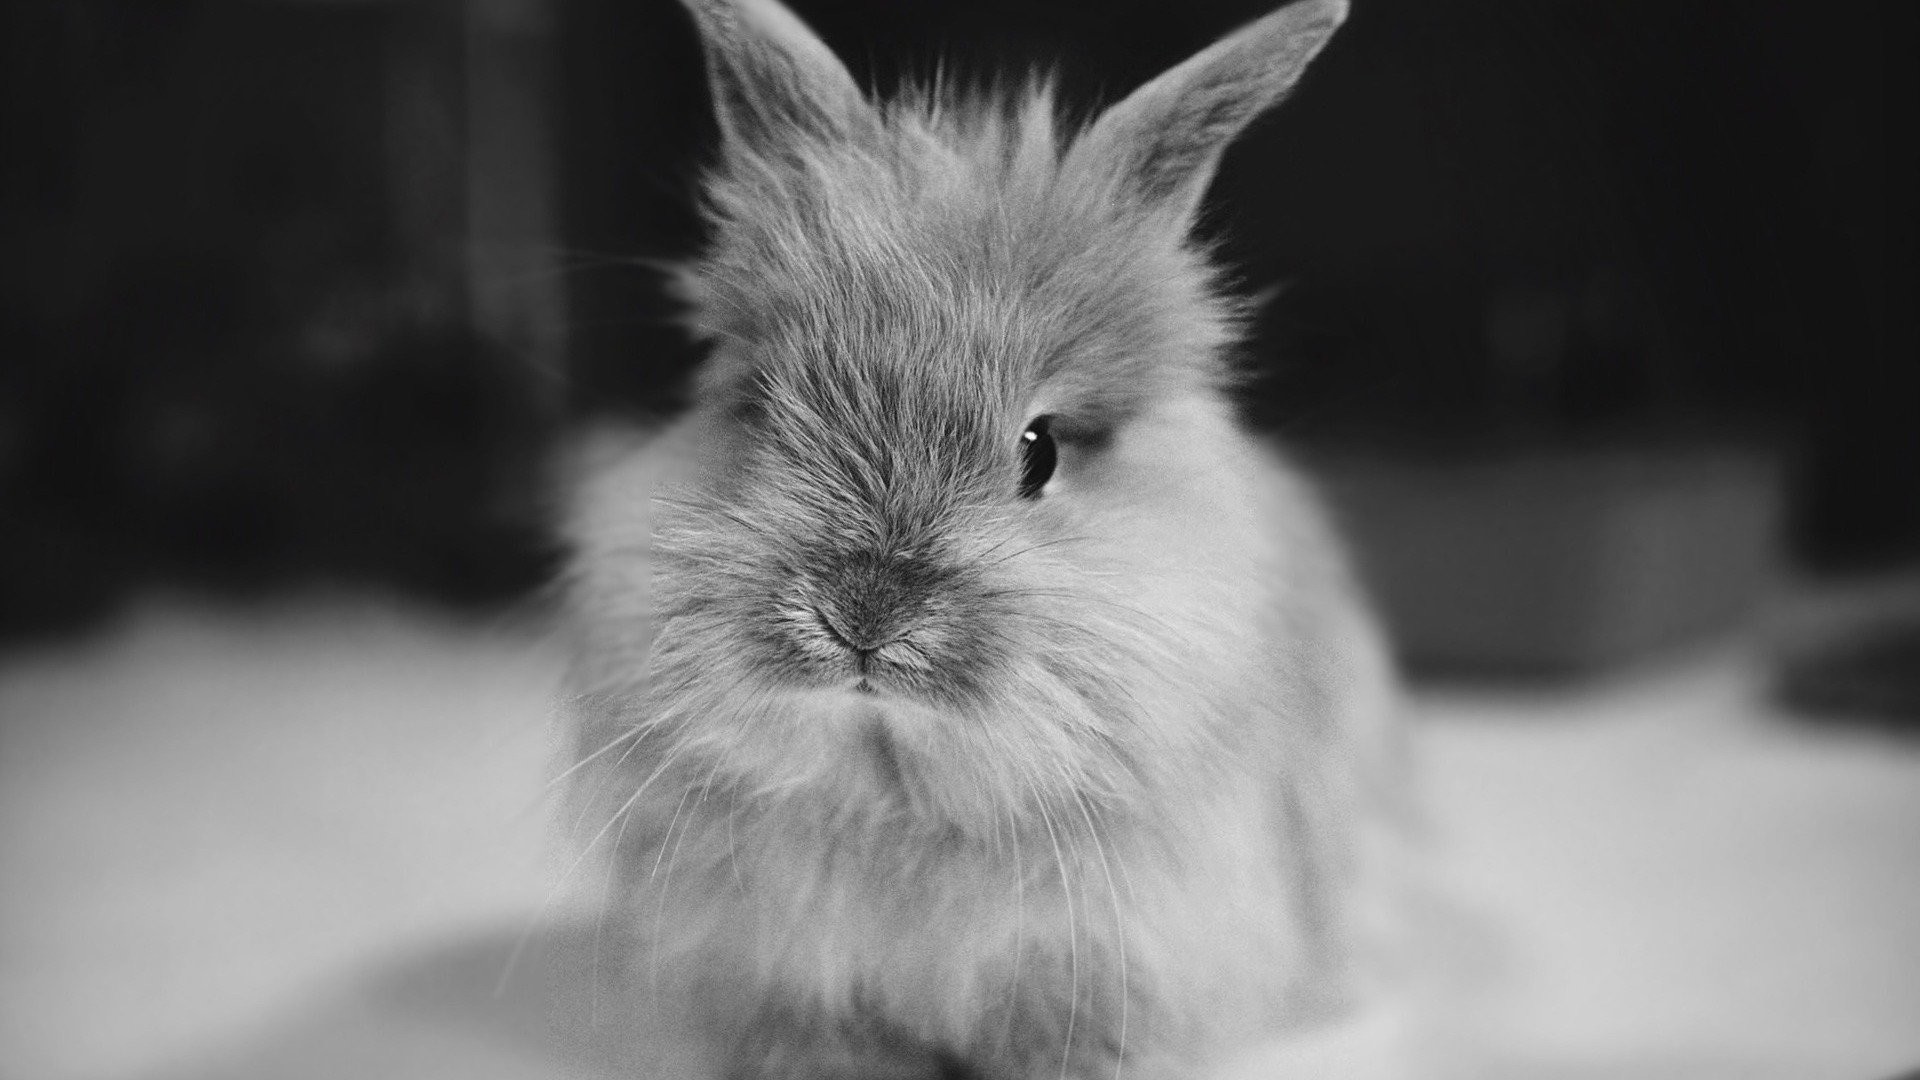 Black And White Bunny